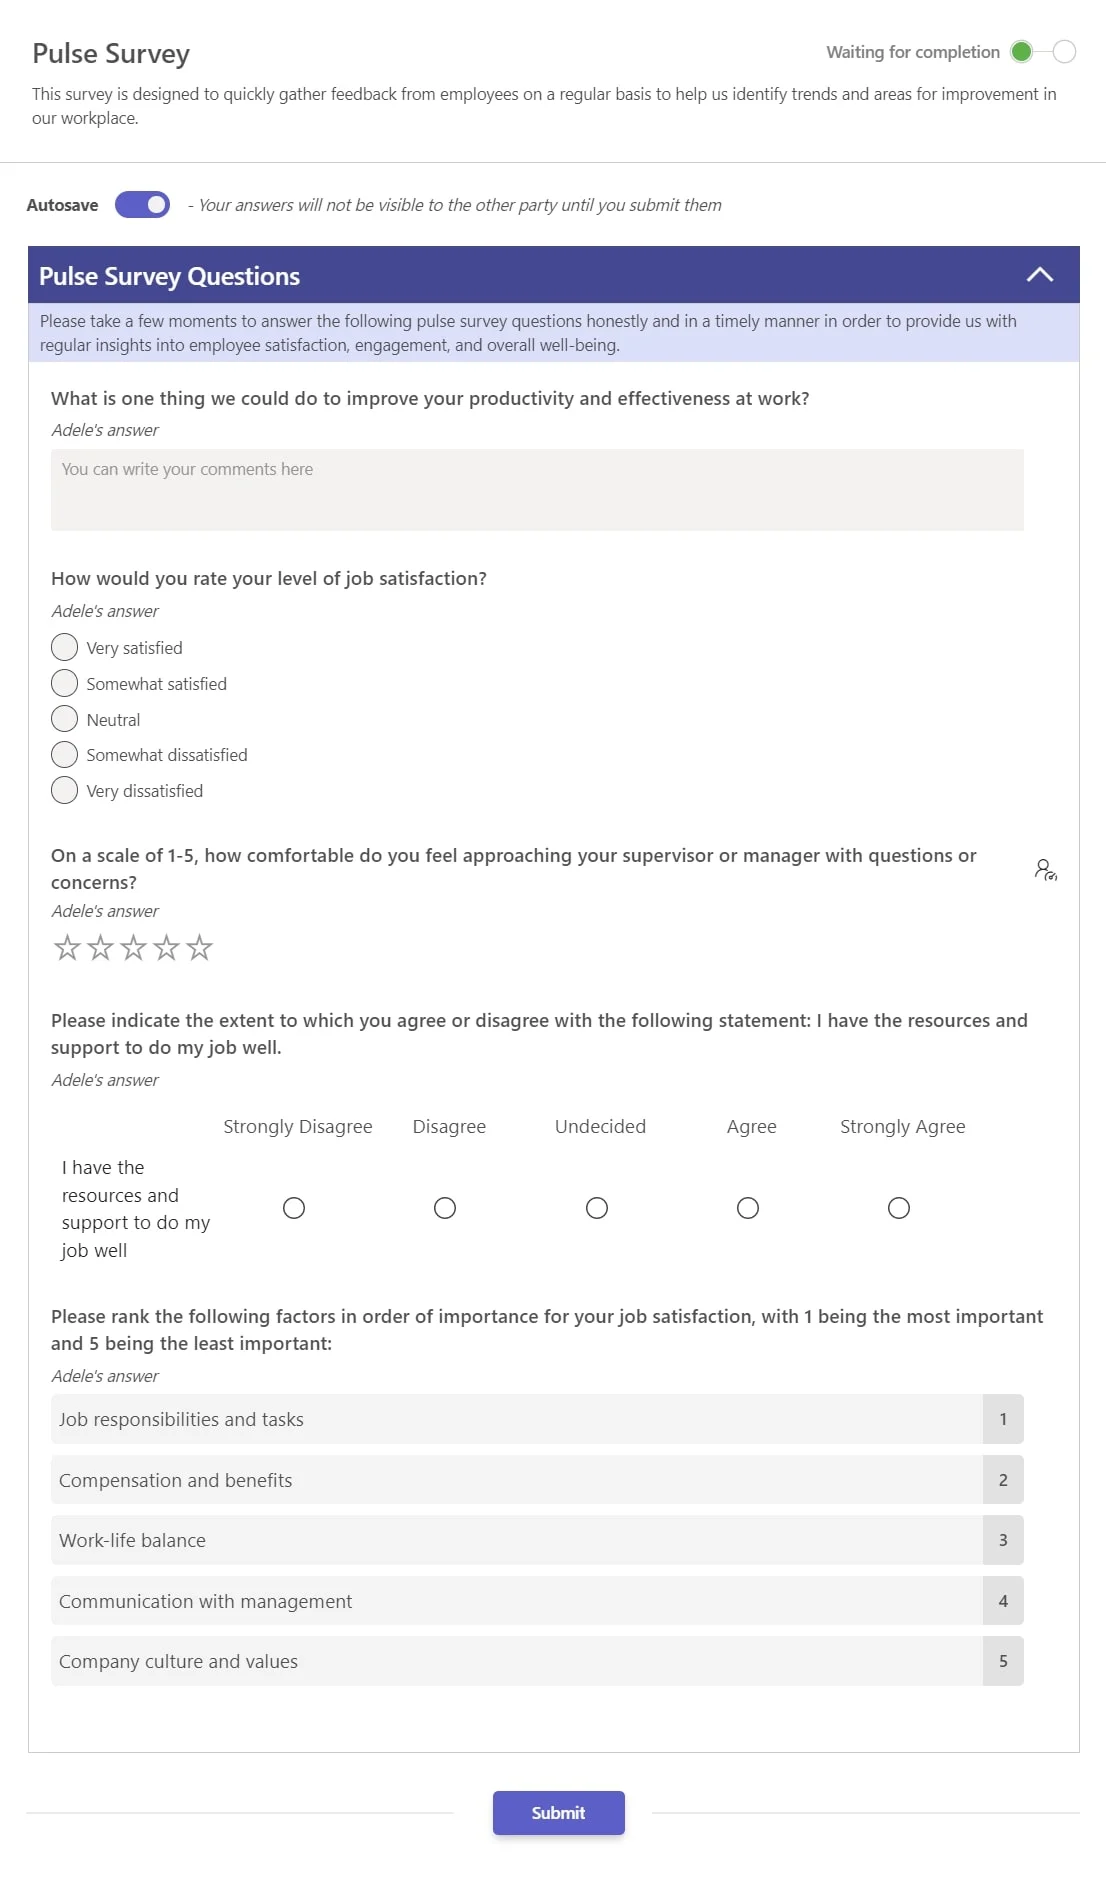 teamflect pulse survey template with questions